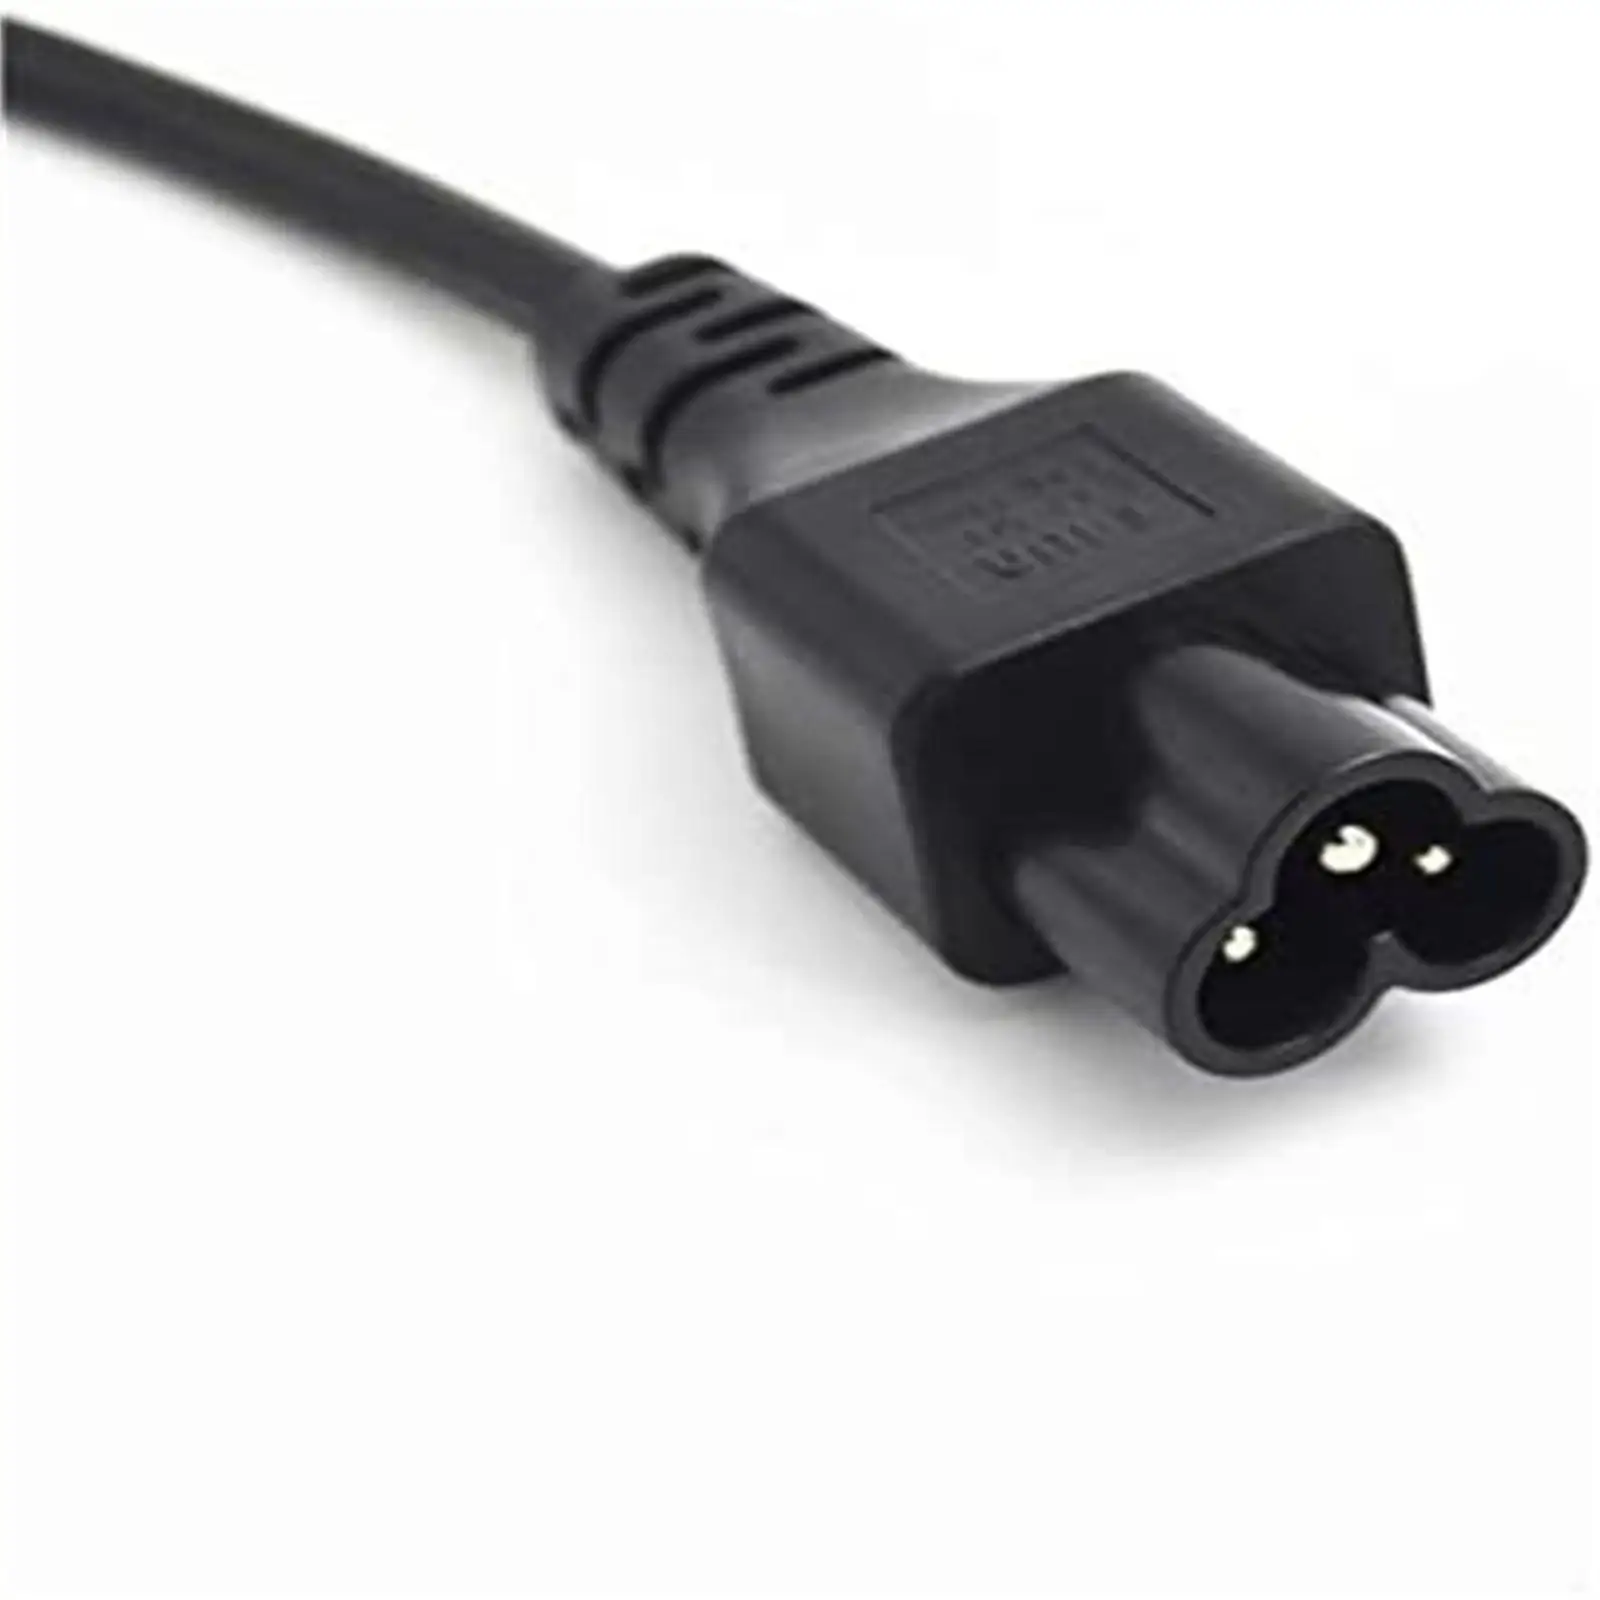 3Pin IEC320 C5 Female to C6 Male Extension Cable 2ft/0.6M Male to Female Low 2.5A Stable Transmission for Notebook